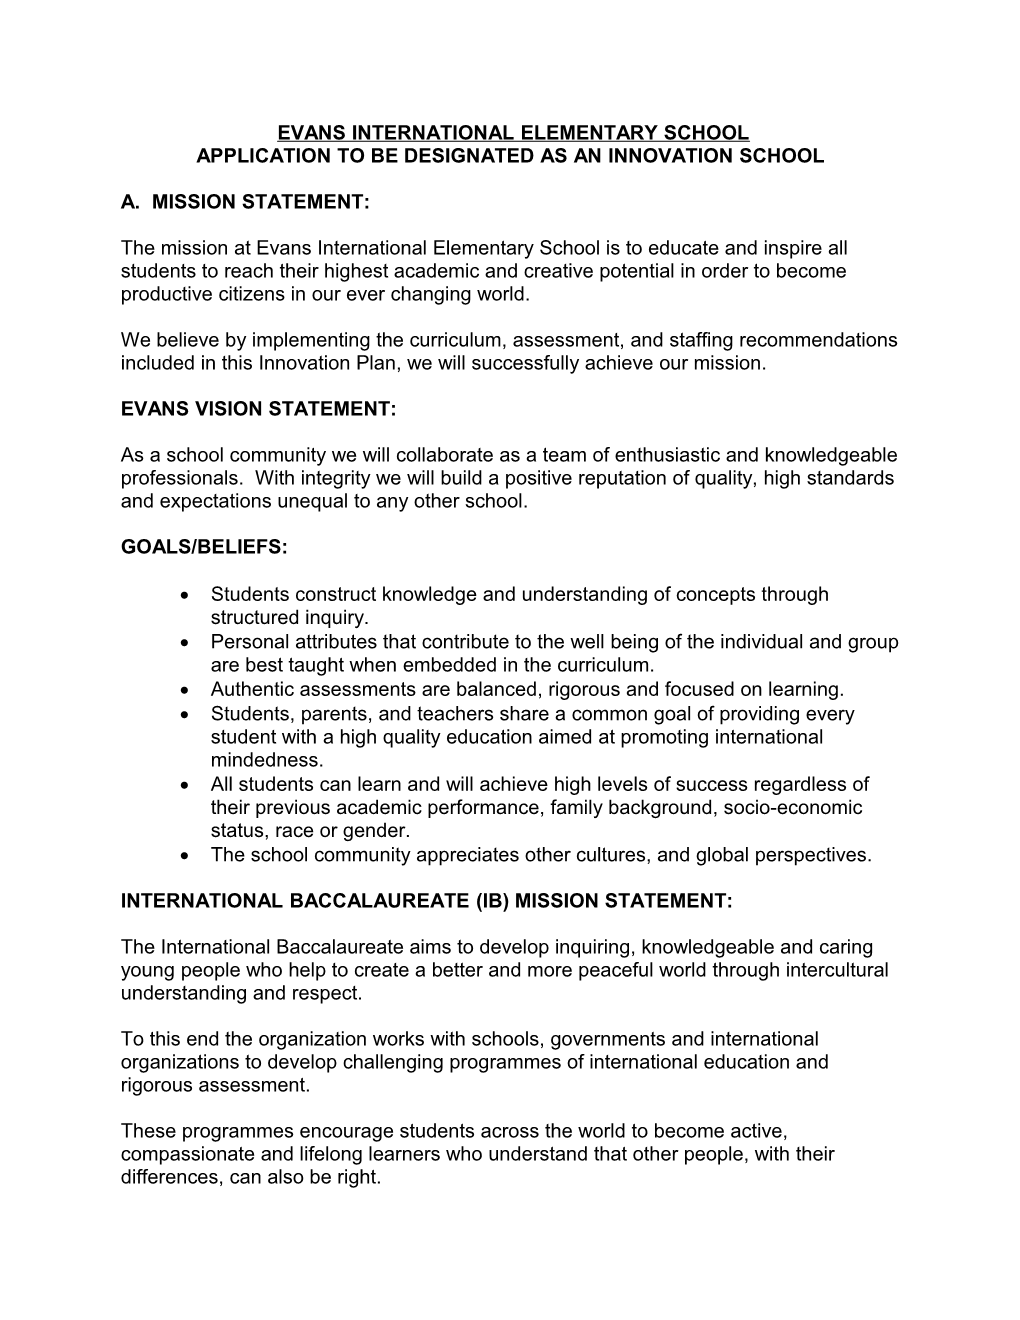 Application to Be Designated As an Innovation School